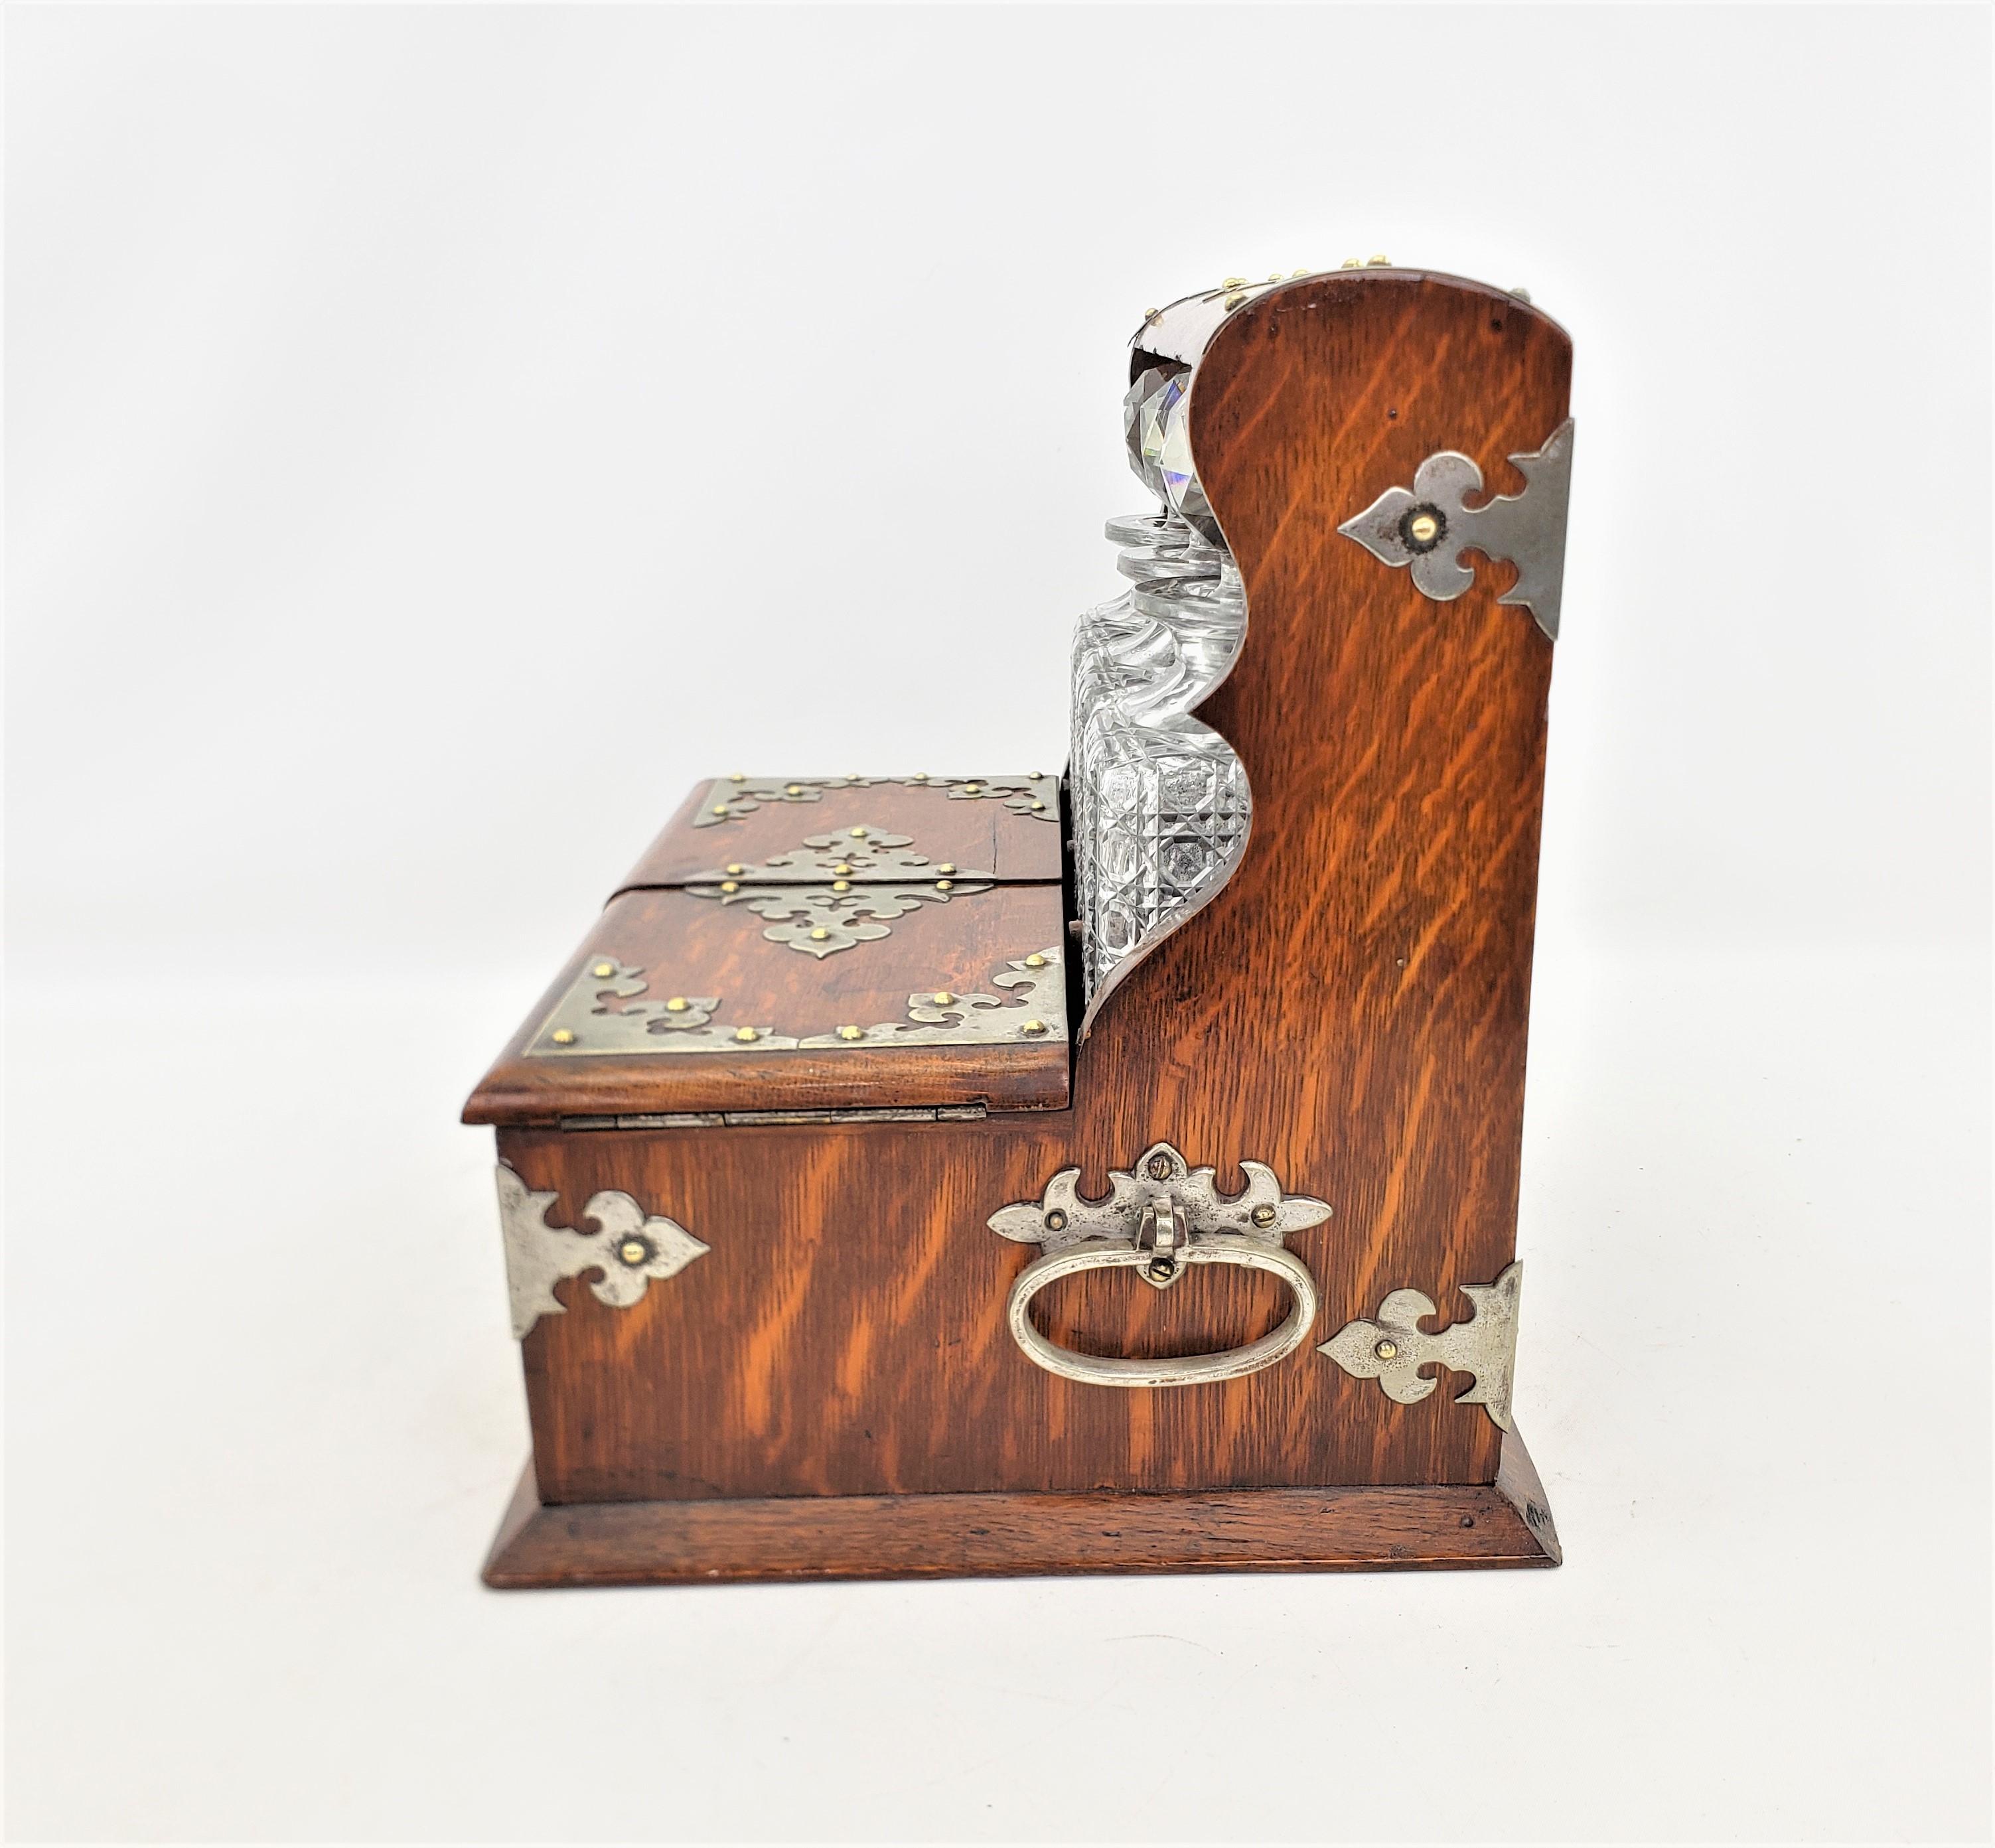 High Victorian Antique Oak Tantalus with Ornate Silver Plated Mounts & Games Compendium Set